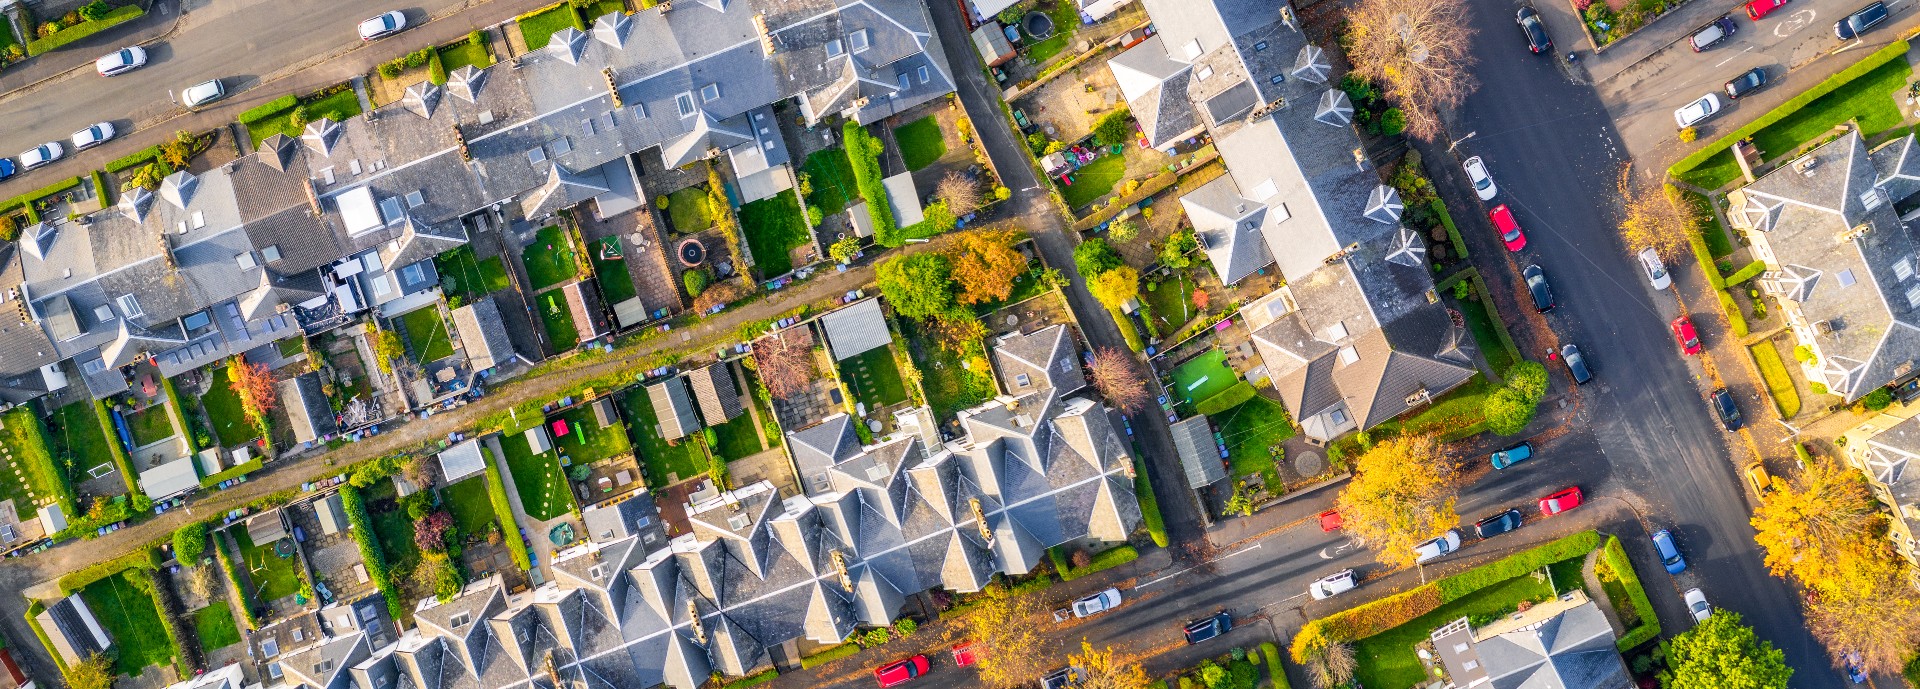 Aerial view of houses on a UK street